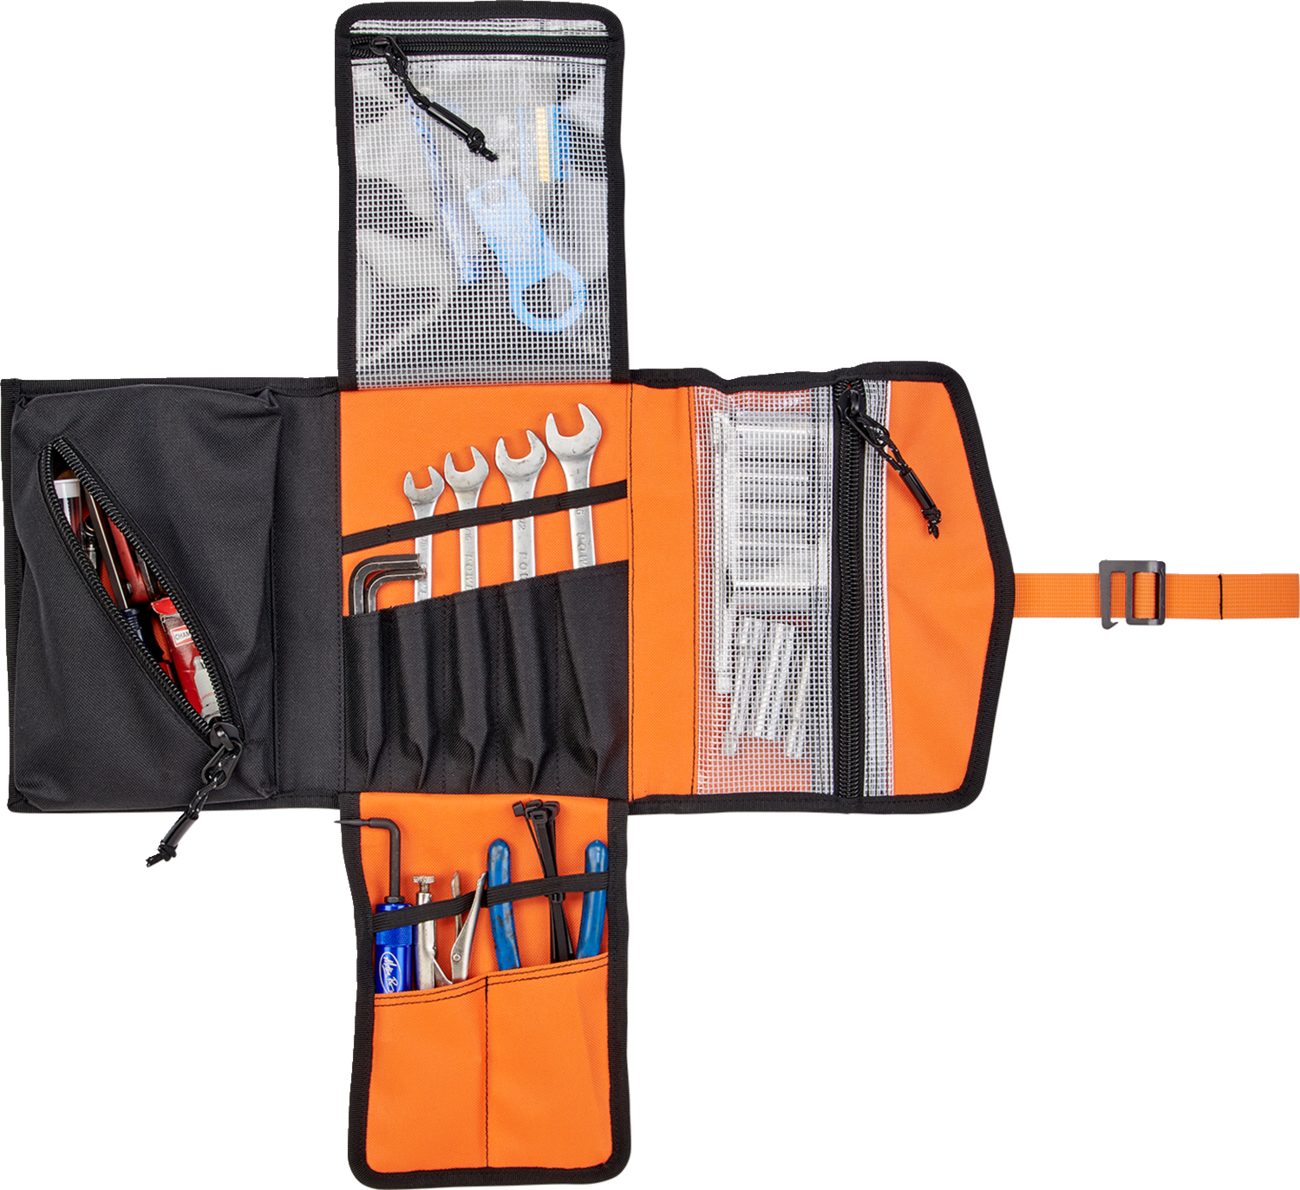 Rolling tool-0 2.0 tools case